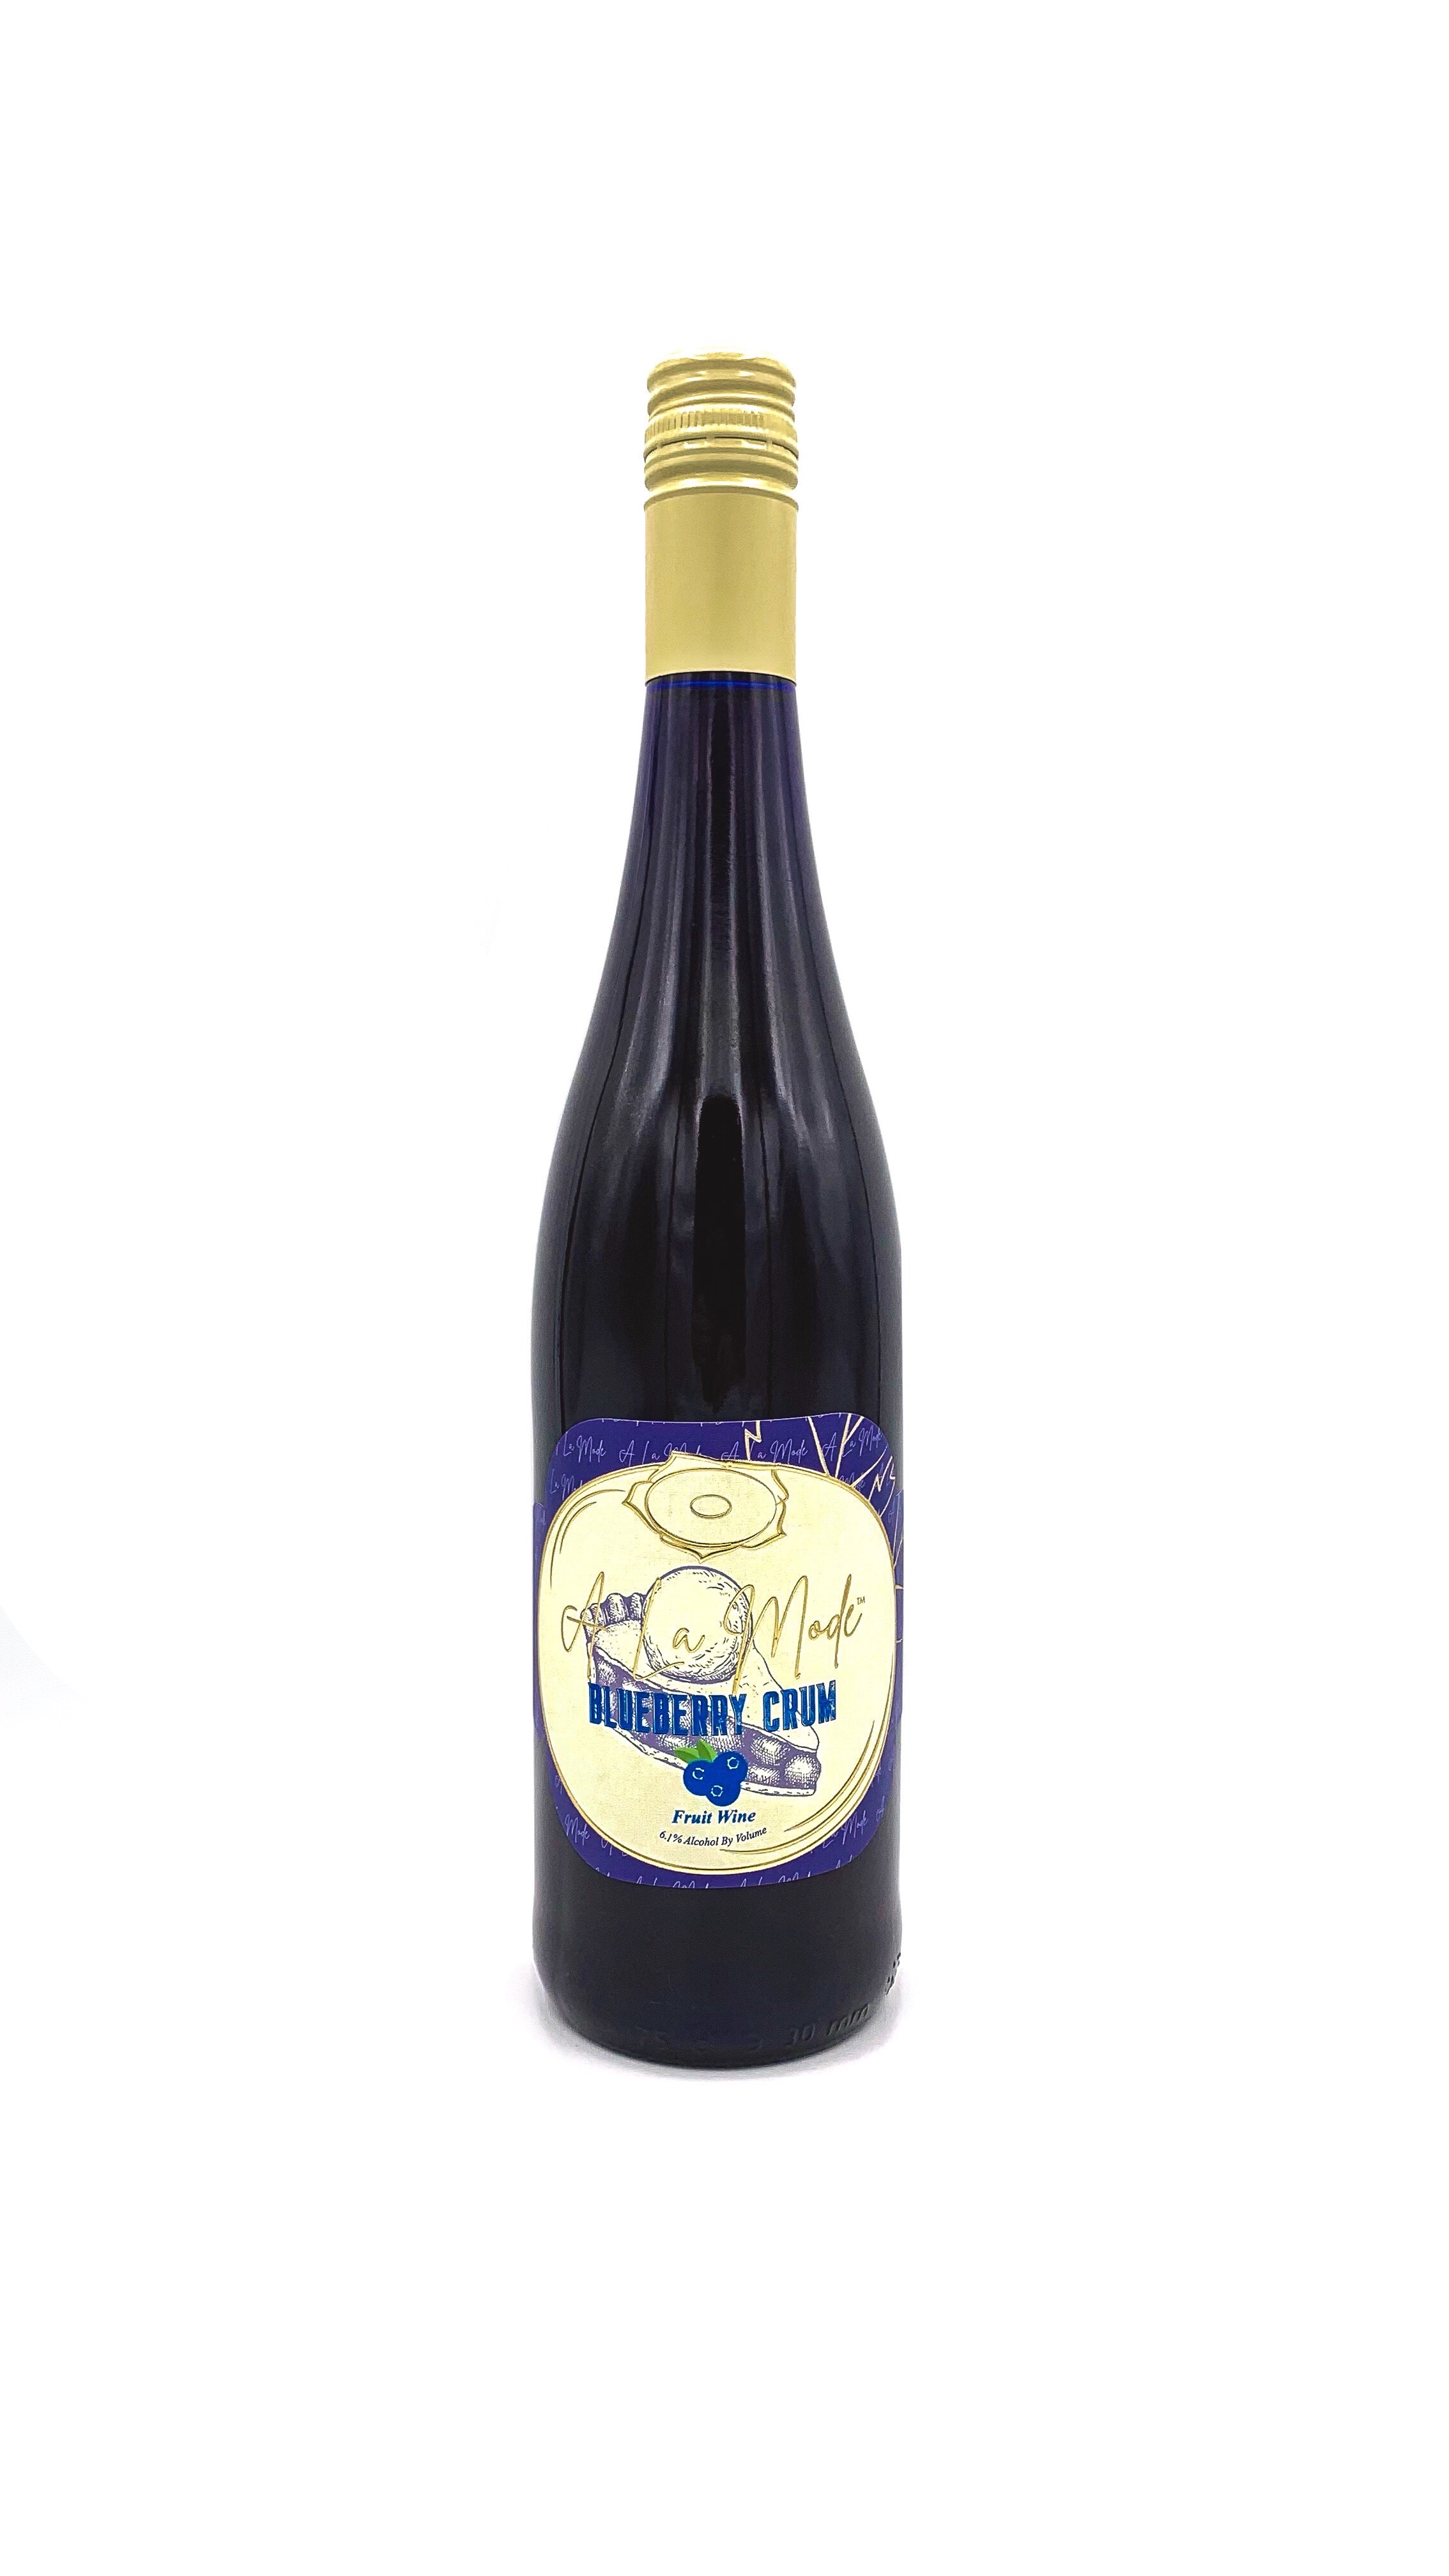 Product Image for A La Mode Blueberry Crum